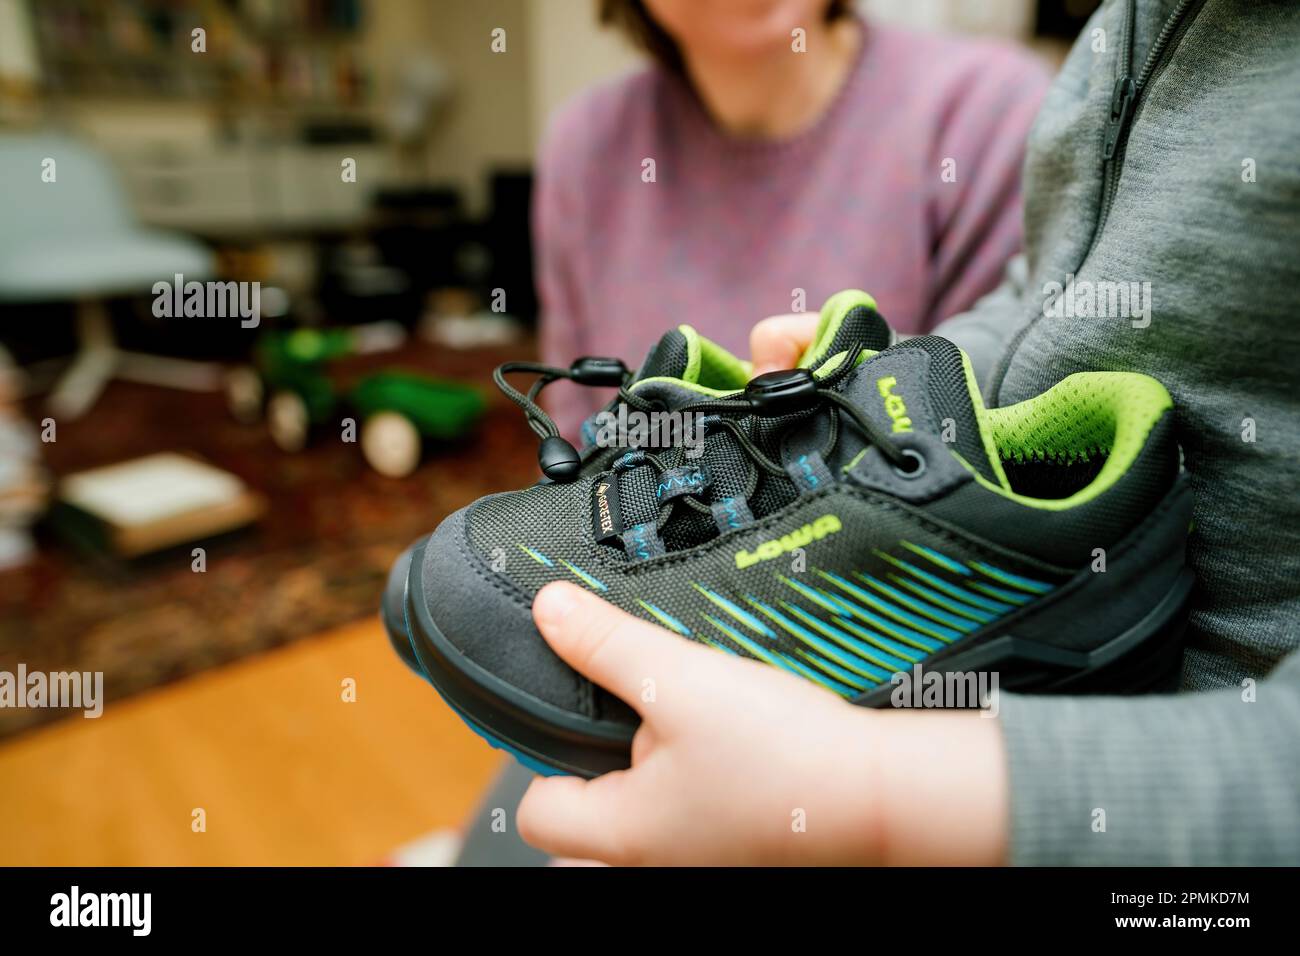 Frankfurt, Germany - Mar 12, 2023: A child showing modern, stylish Lowa  boots with vibrant blue and green design. Waterproof and insulated for  warmth in cold winter conditions - mother in background Stock Photo - Alamy